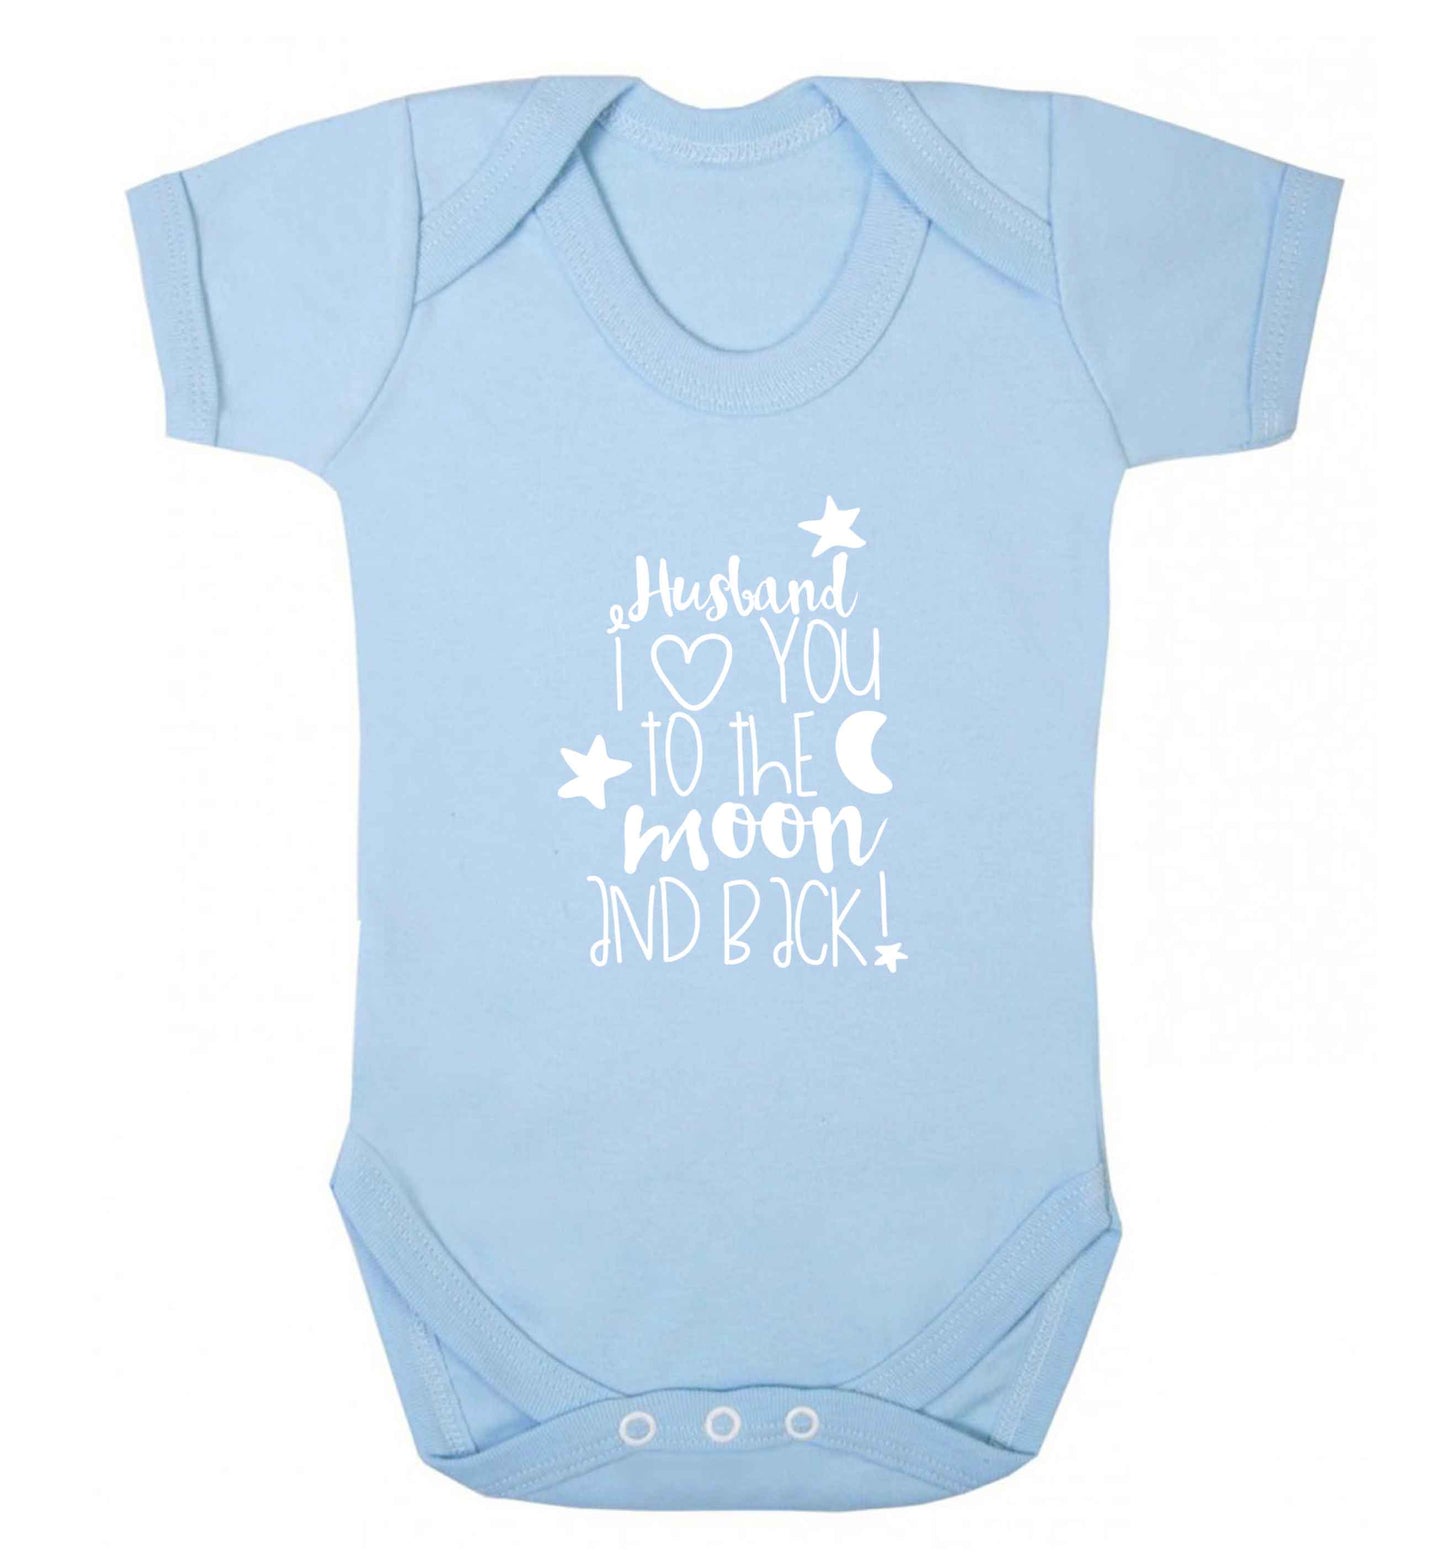 Husband I love you to the moon and back baby vest pale blue 18-24 months